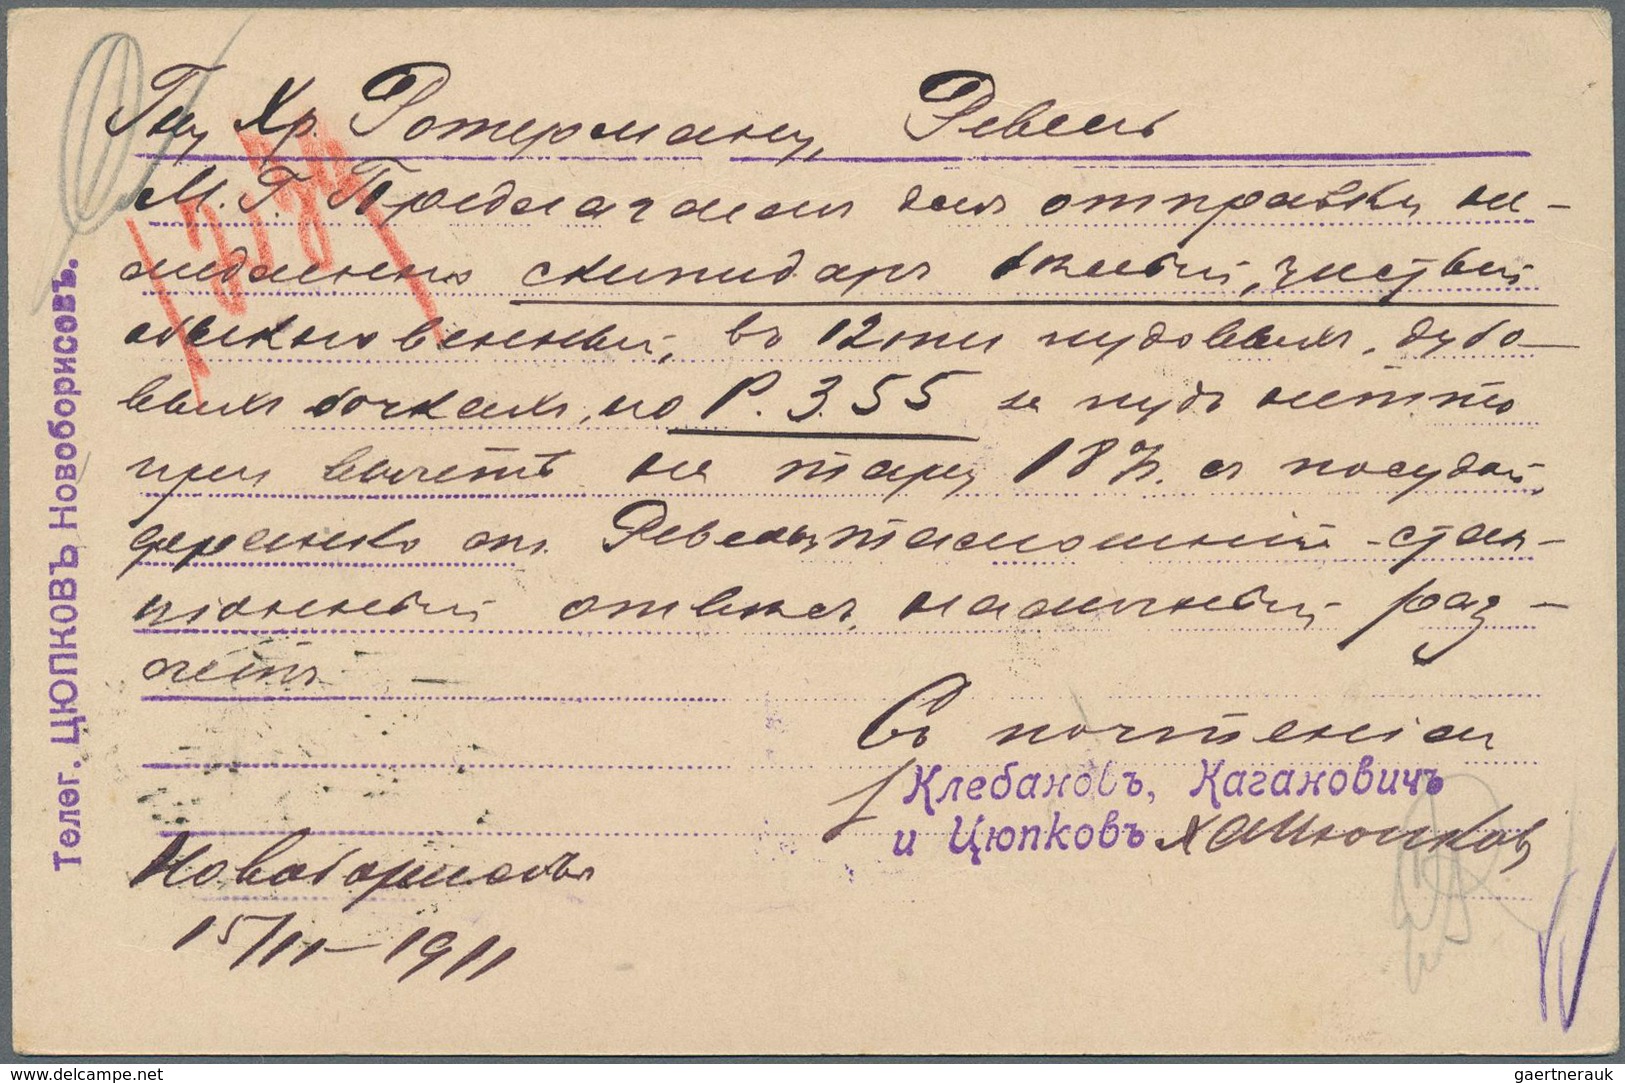 Russland: 1874/1913 Scarce Group Of 14 Items All Canceled By Cachets Of TPO-LINE 41-42 And 42-41 Mos - Covers & Documents